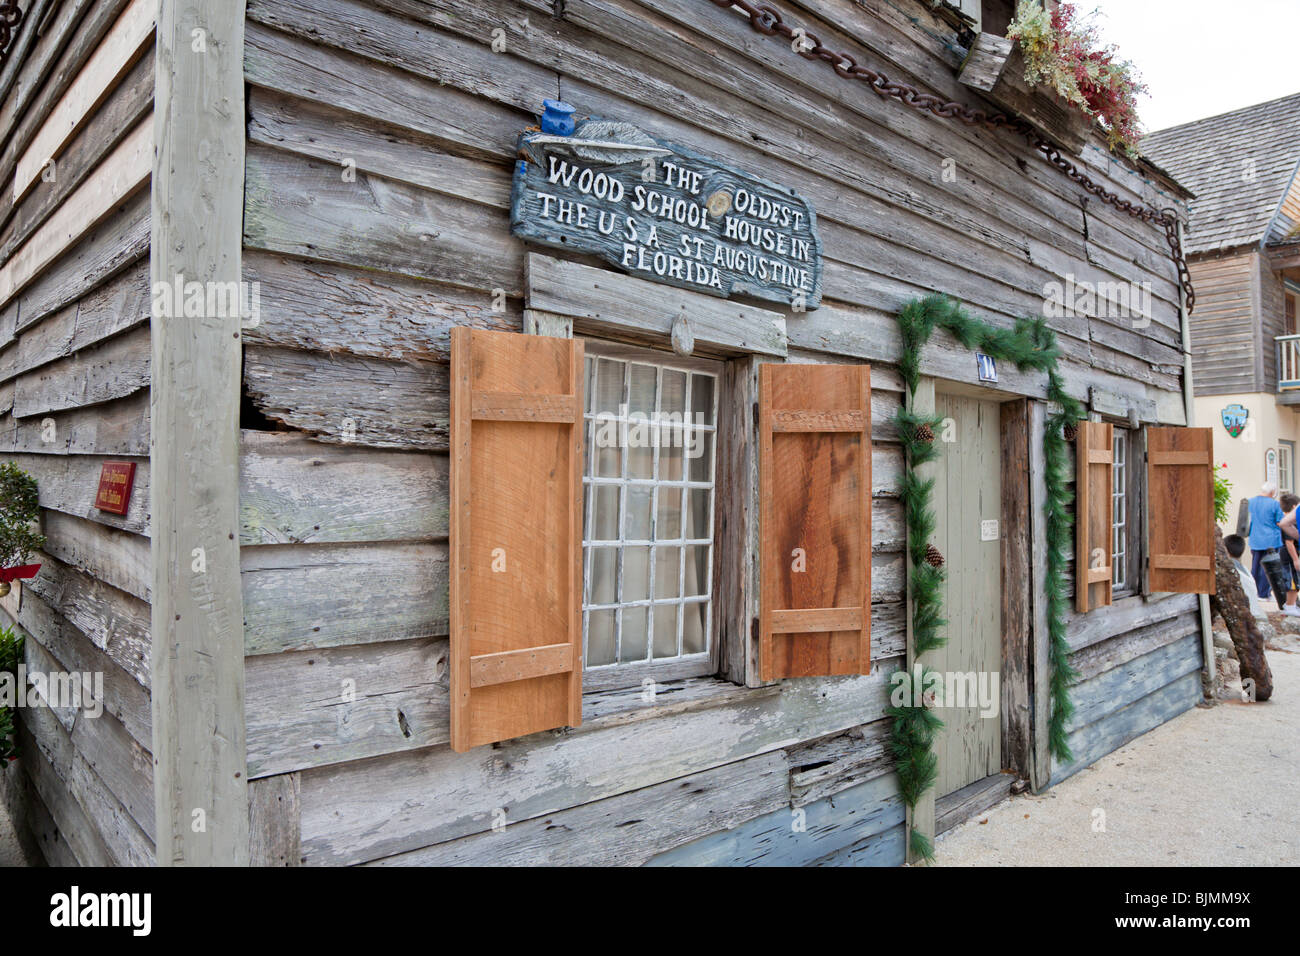 St. Augustine, FL - Jan 2009 - The oldest wood school house in the USA in St. Augustine, Florida Stock Photo